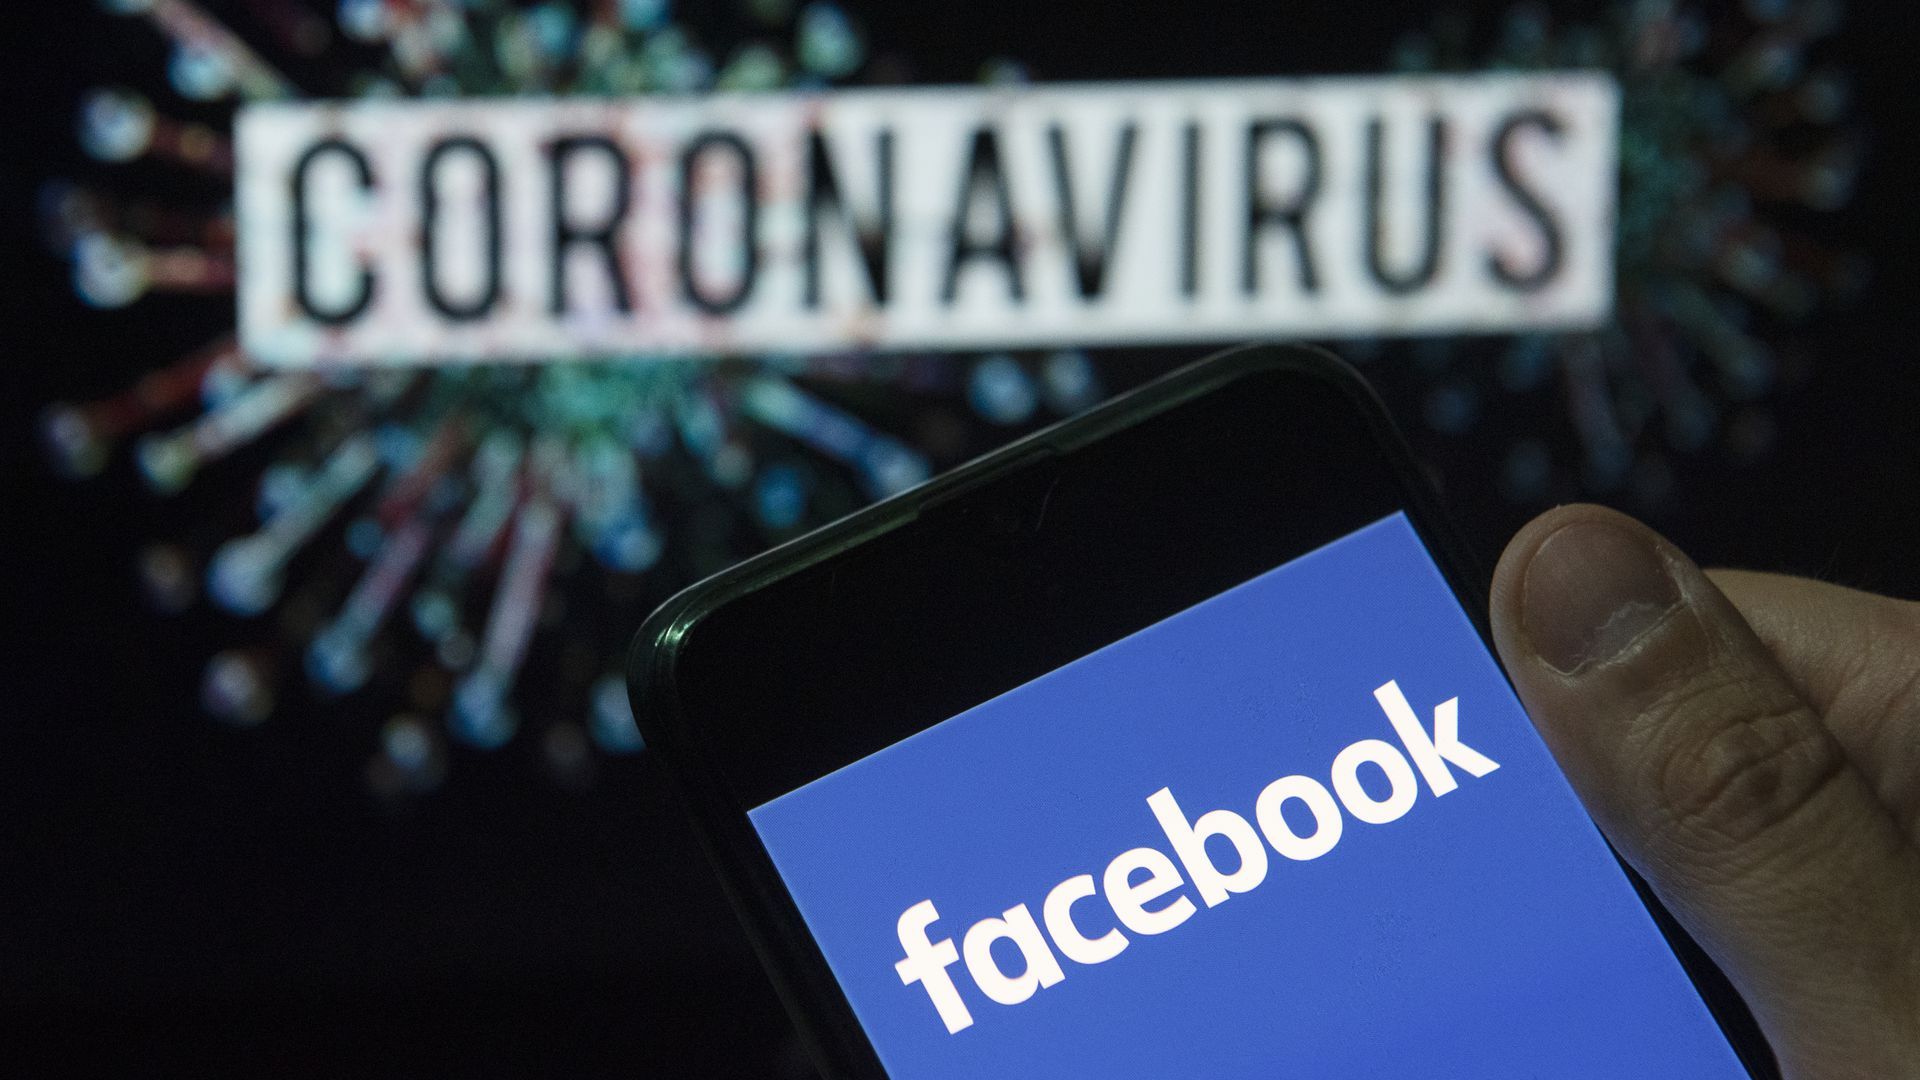 A photo illustration of a Facebook logo on a smartphone in front of a Coronavirus sign.